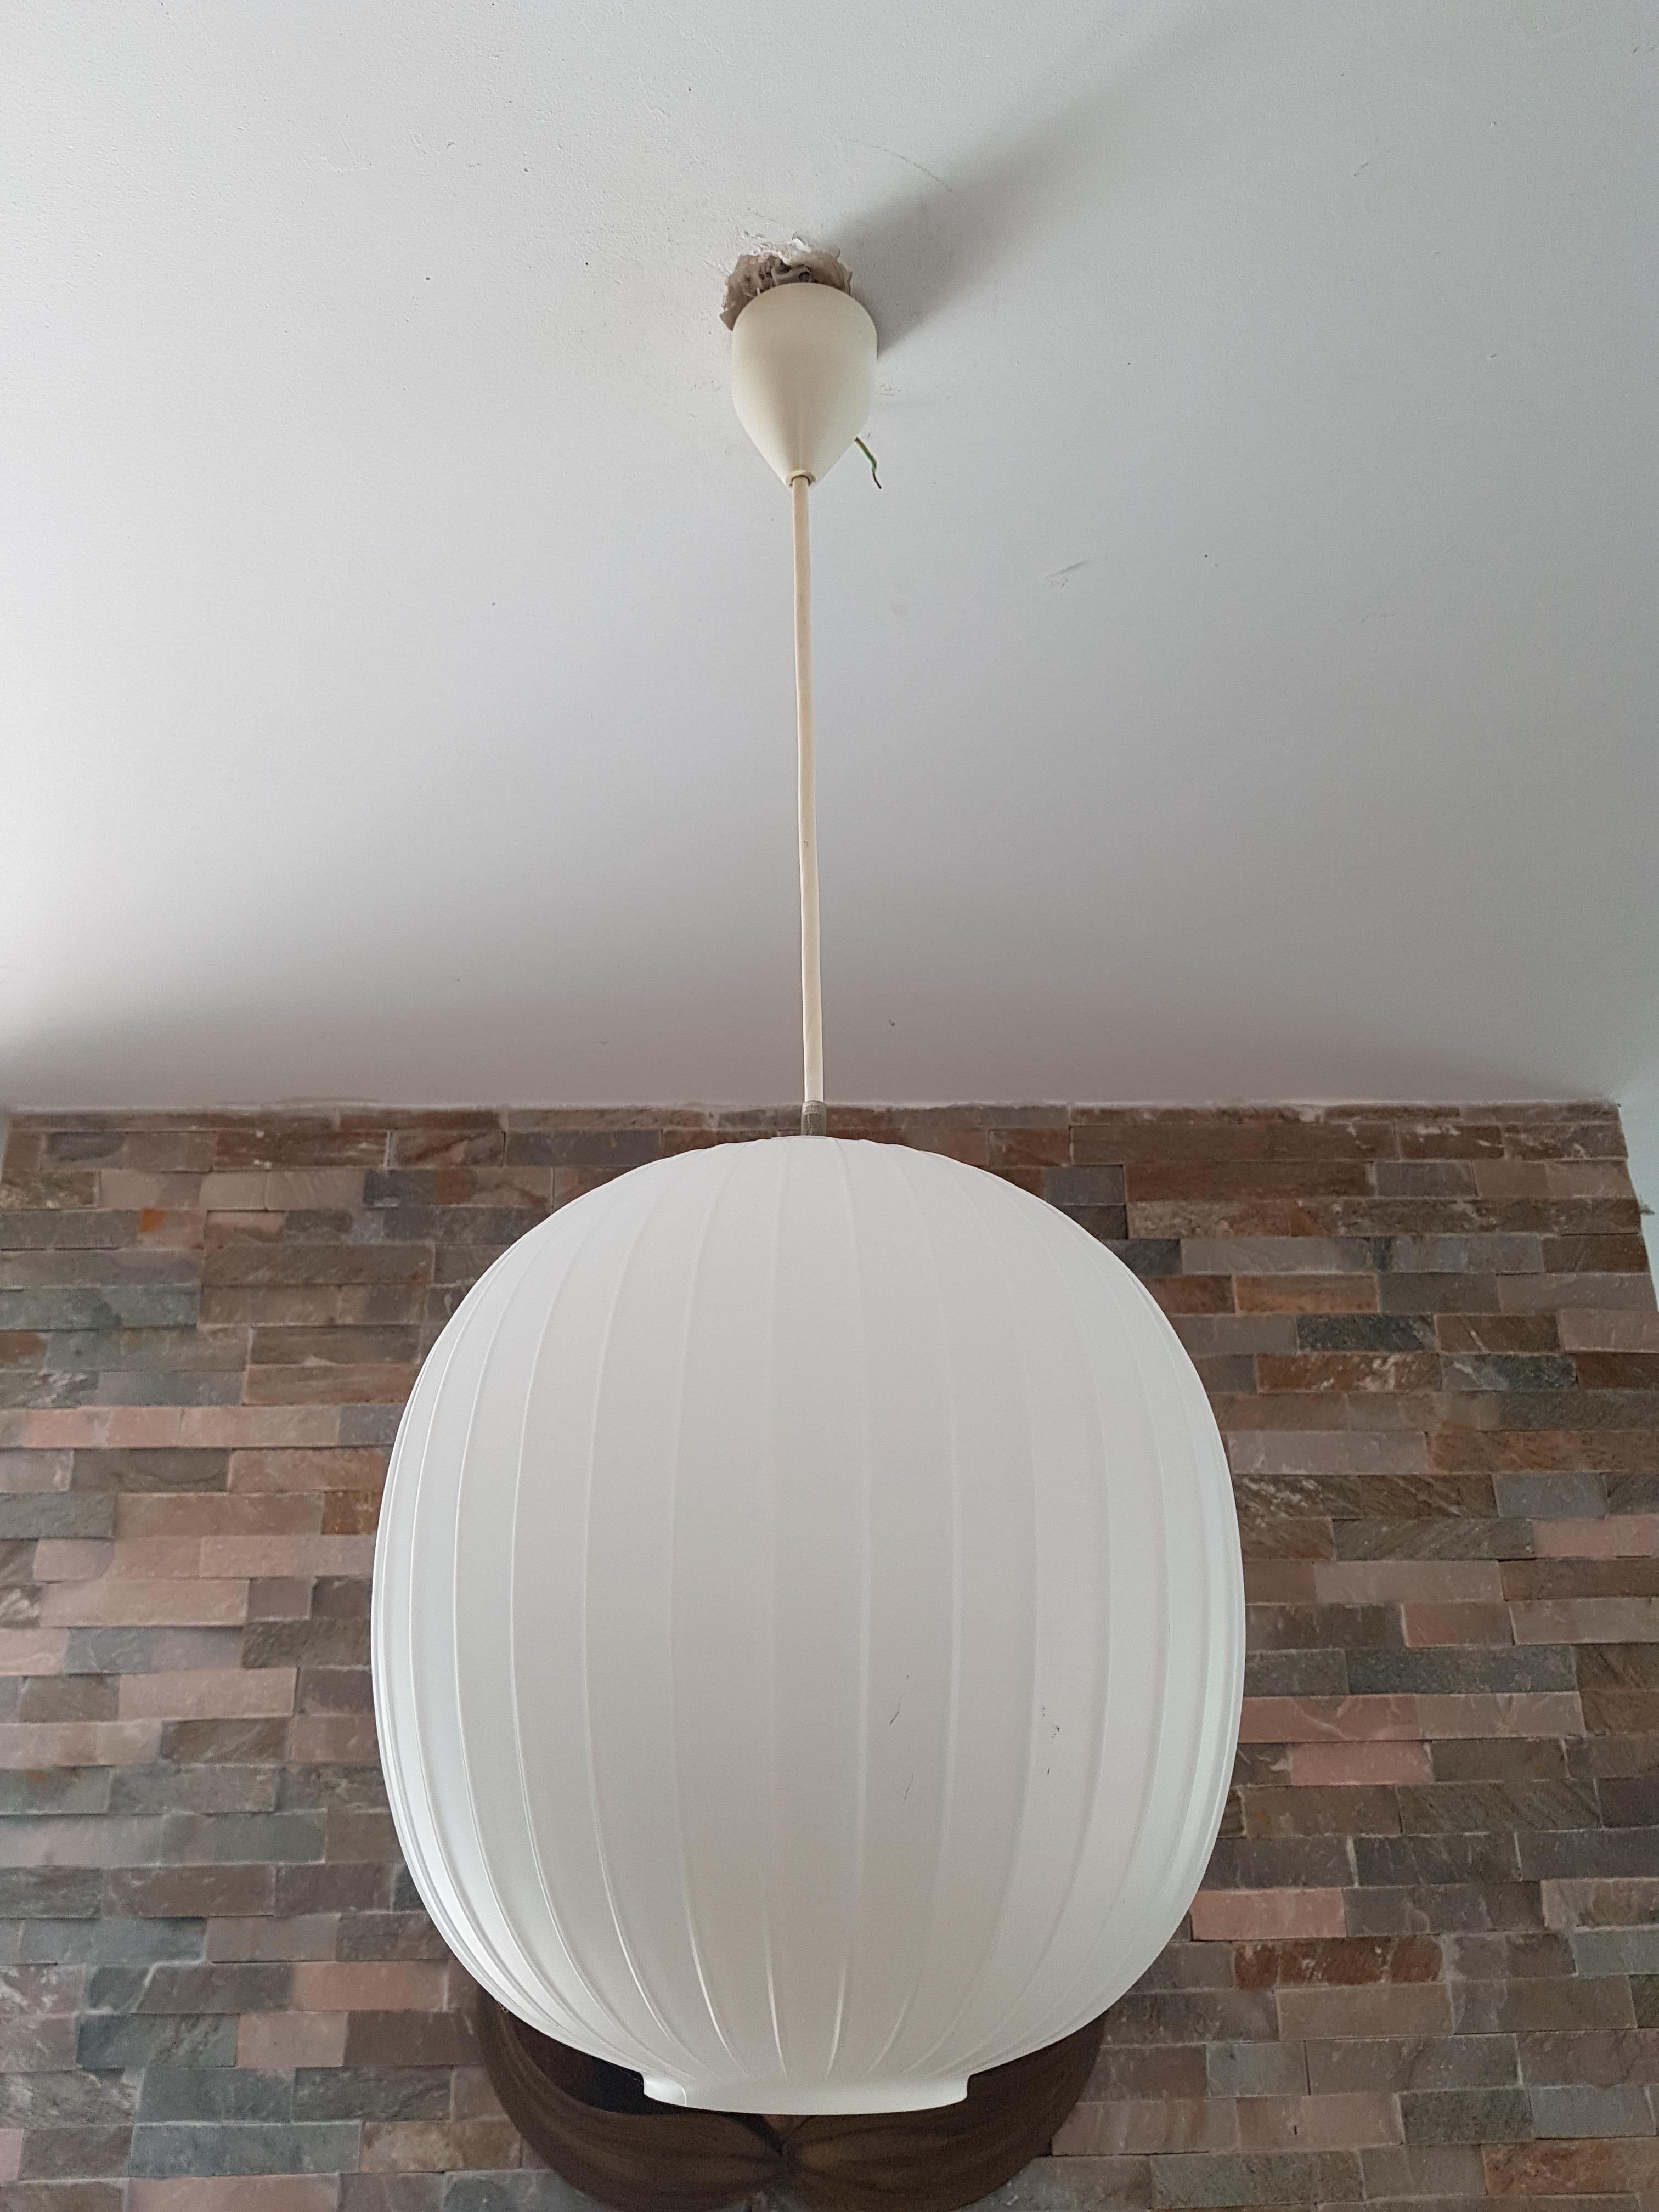 Mid-Century Modern Midcentury Pendant Lamp Bologna by Gangkofner for Peill & Putzler, Germany, 1958 For Sale